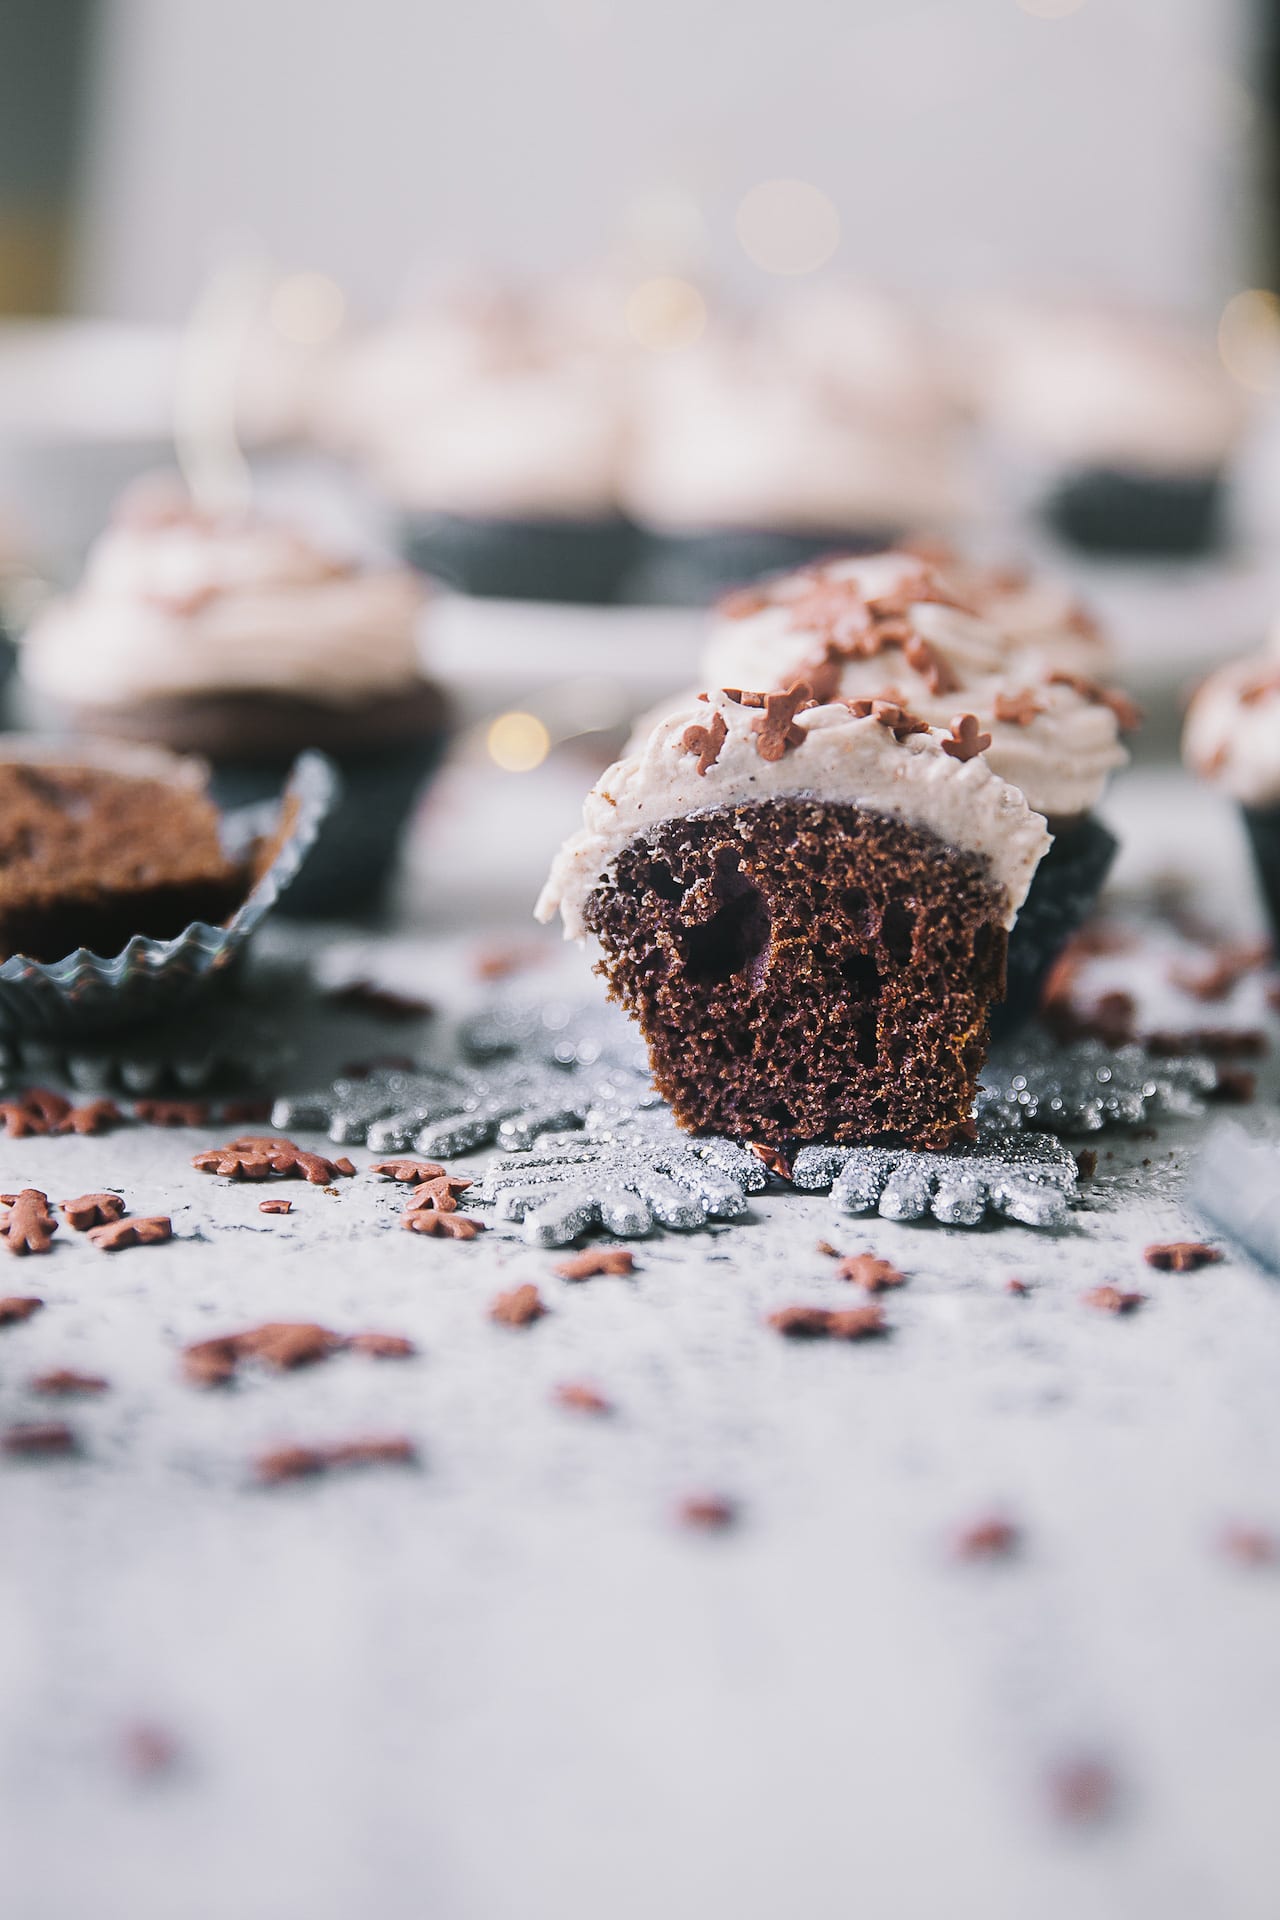 Holiday Treats | Playful Cooking #cupcakes #gingerbread #cupcakes #buttercream #foodphotography